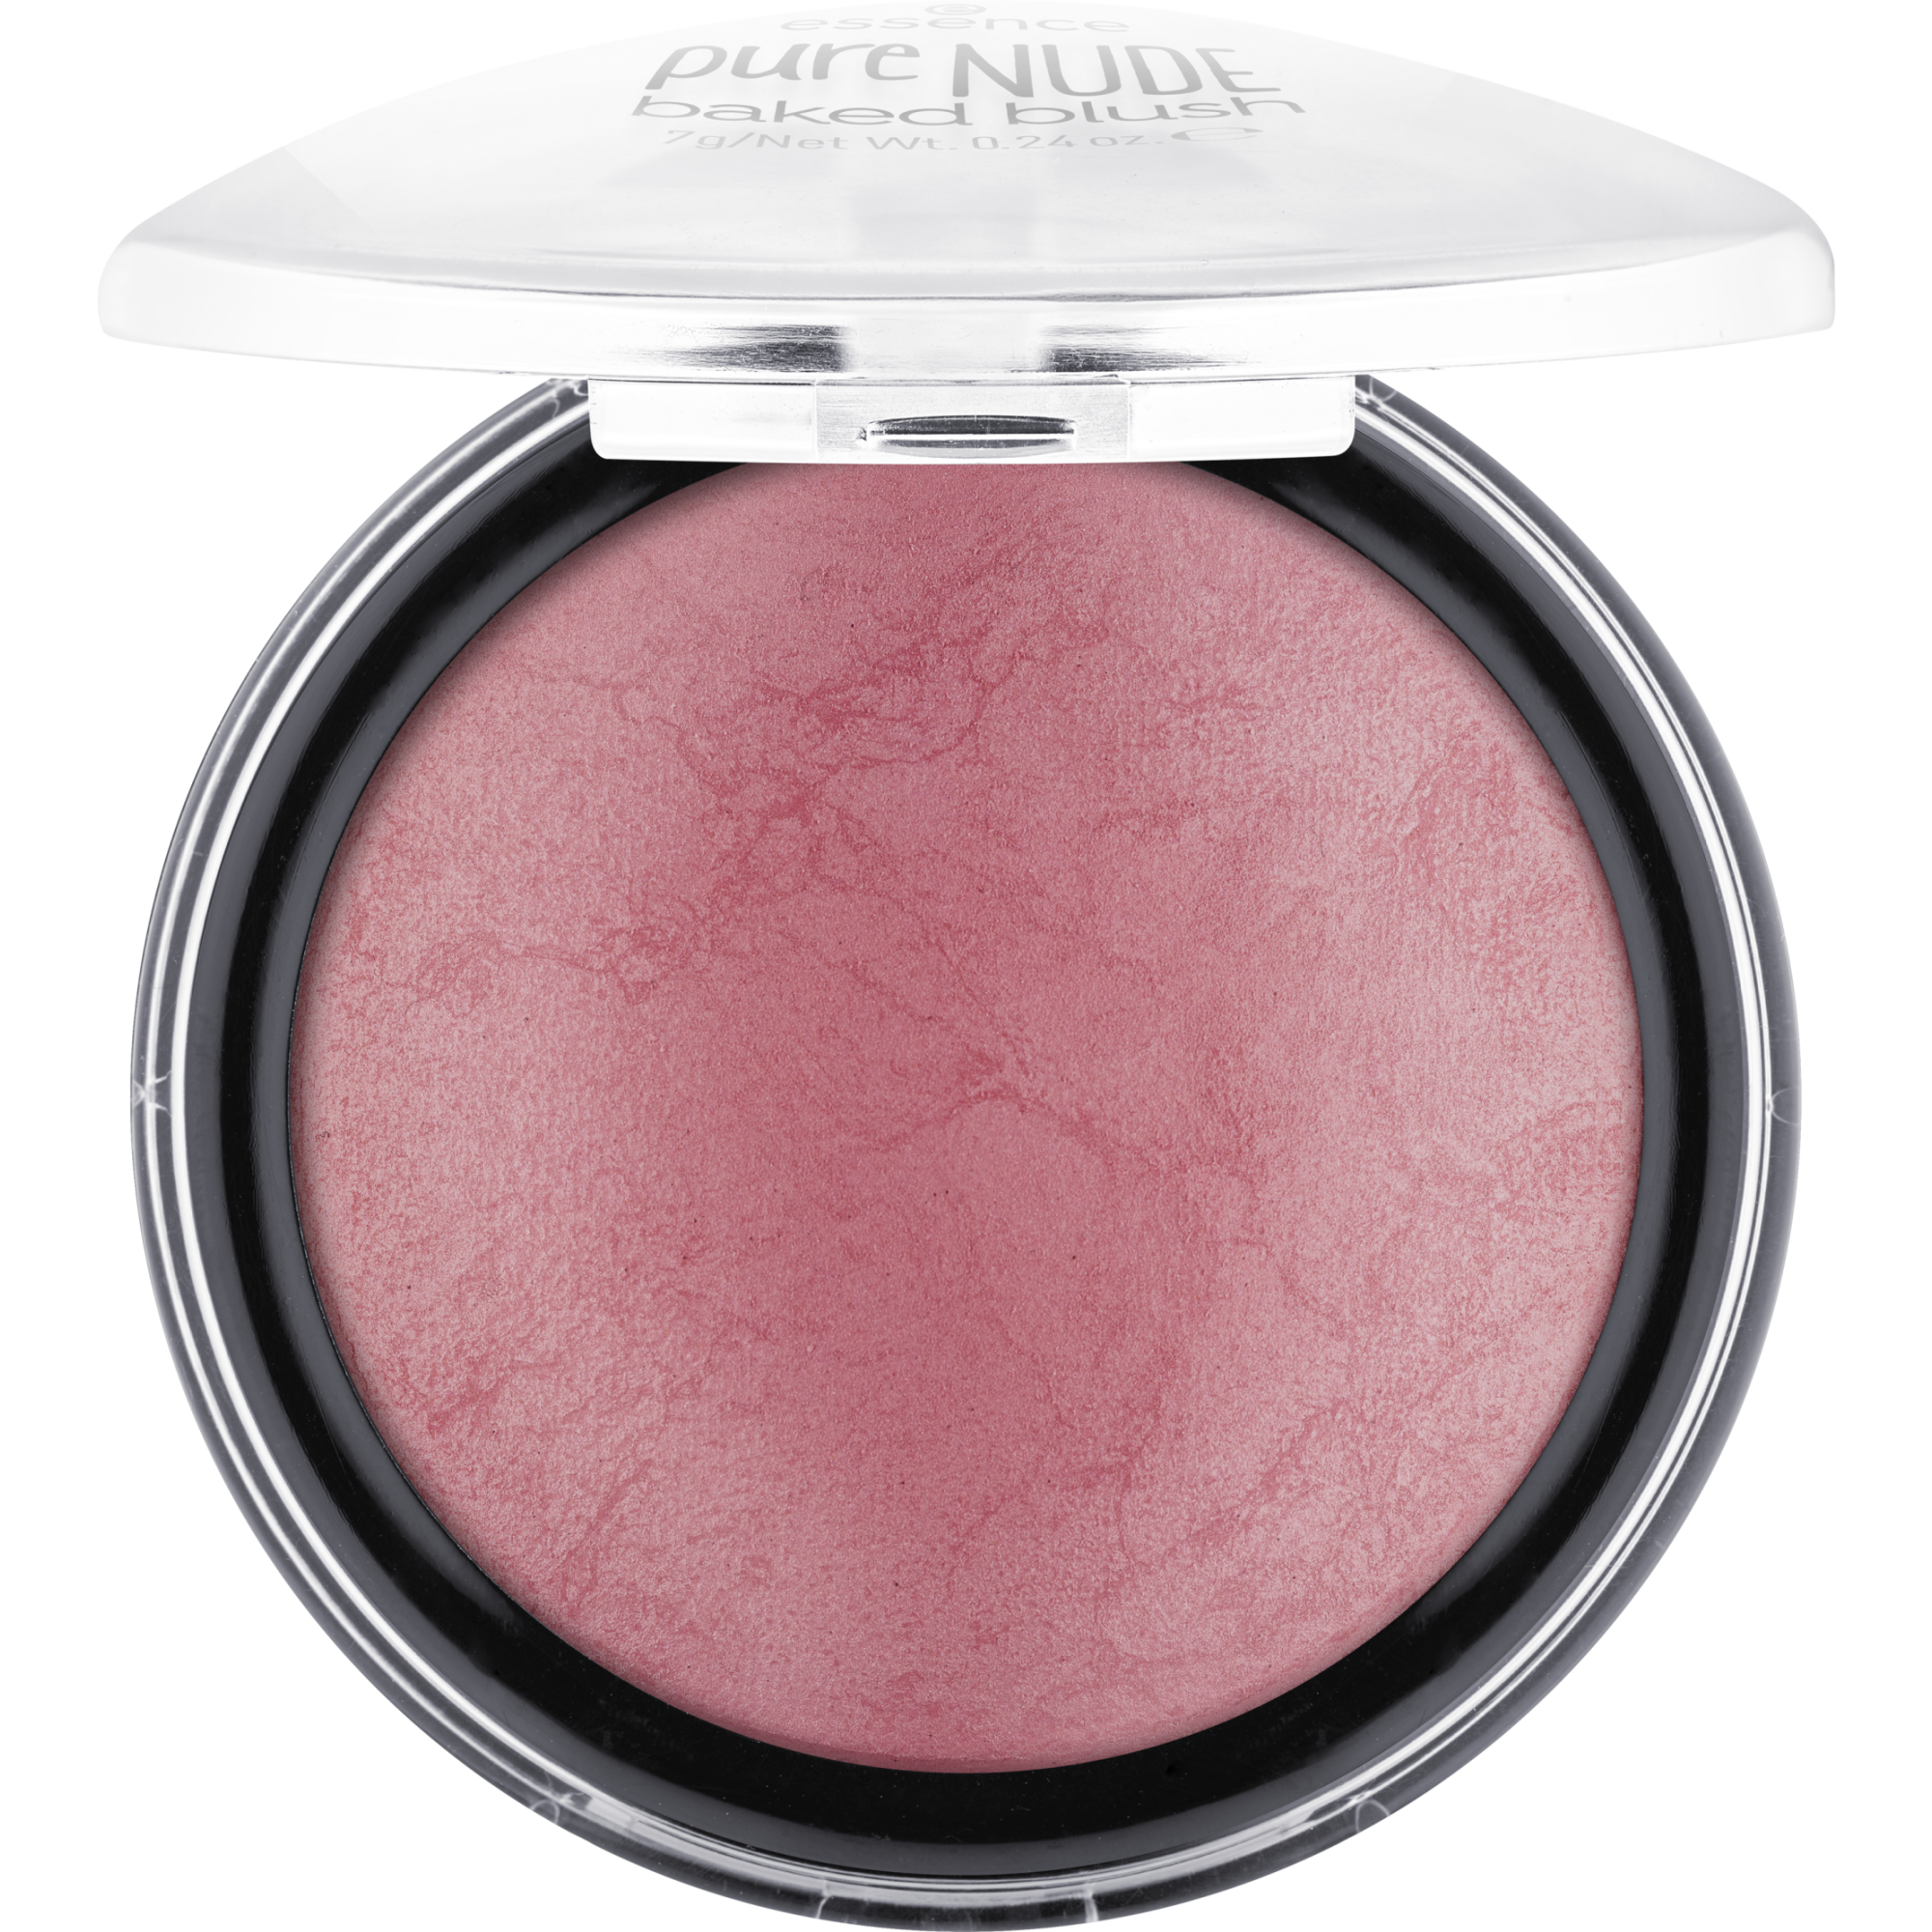 pure NUDE baked blush